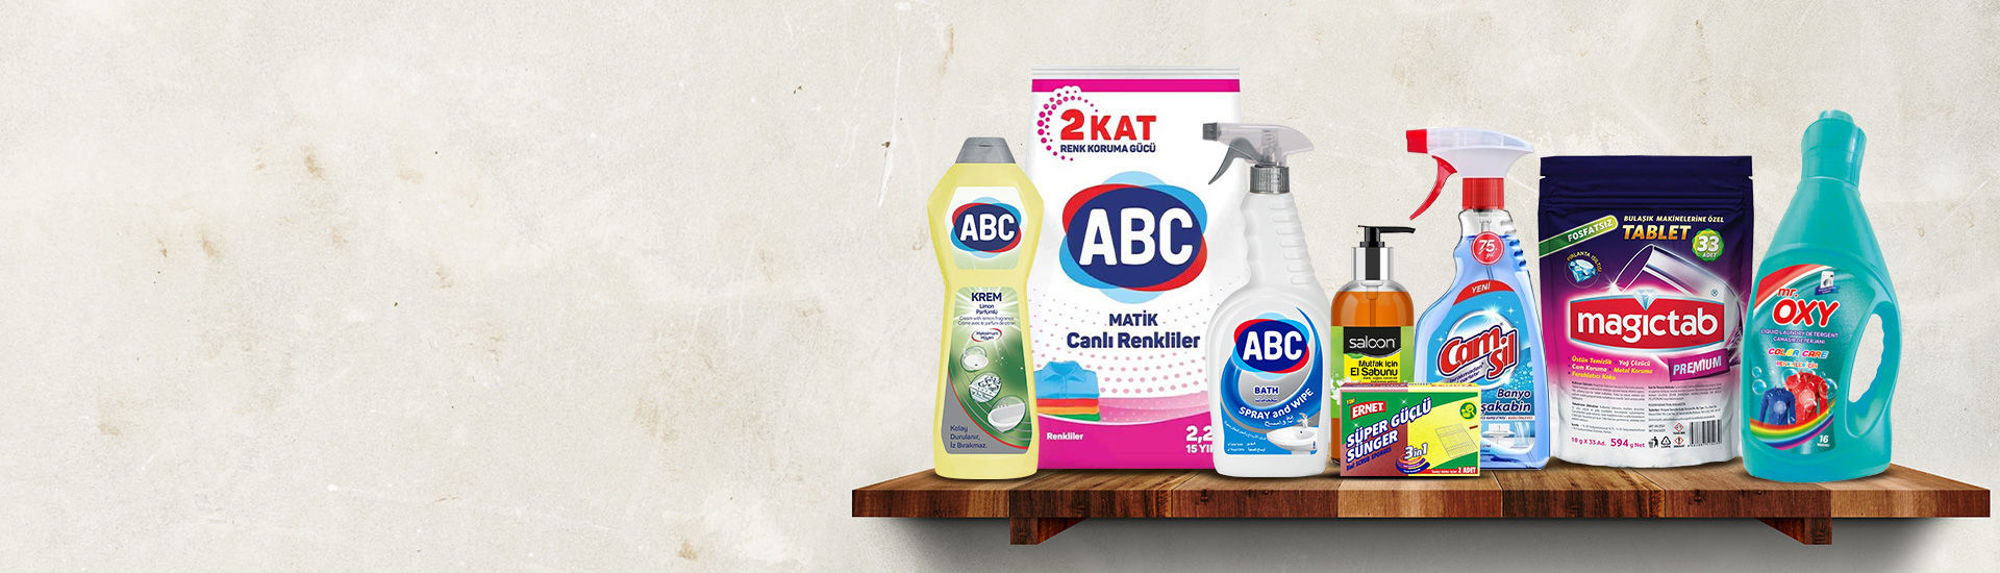 Laundry Detergents: ABC, Hes Matik, Magic Tab, and Mr. Oxy for Cleanliness and Freshness